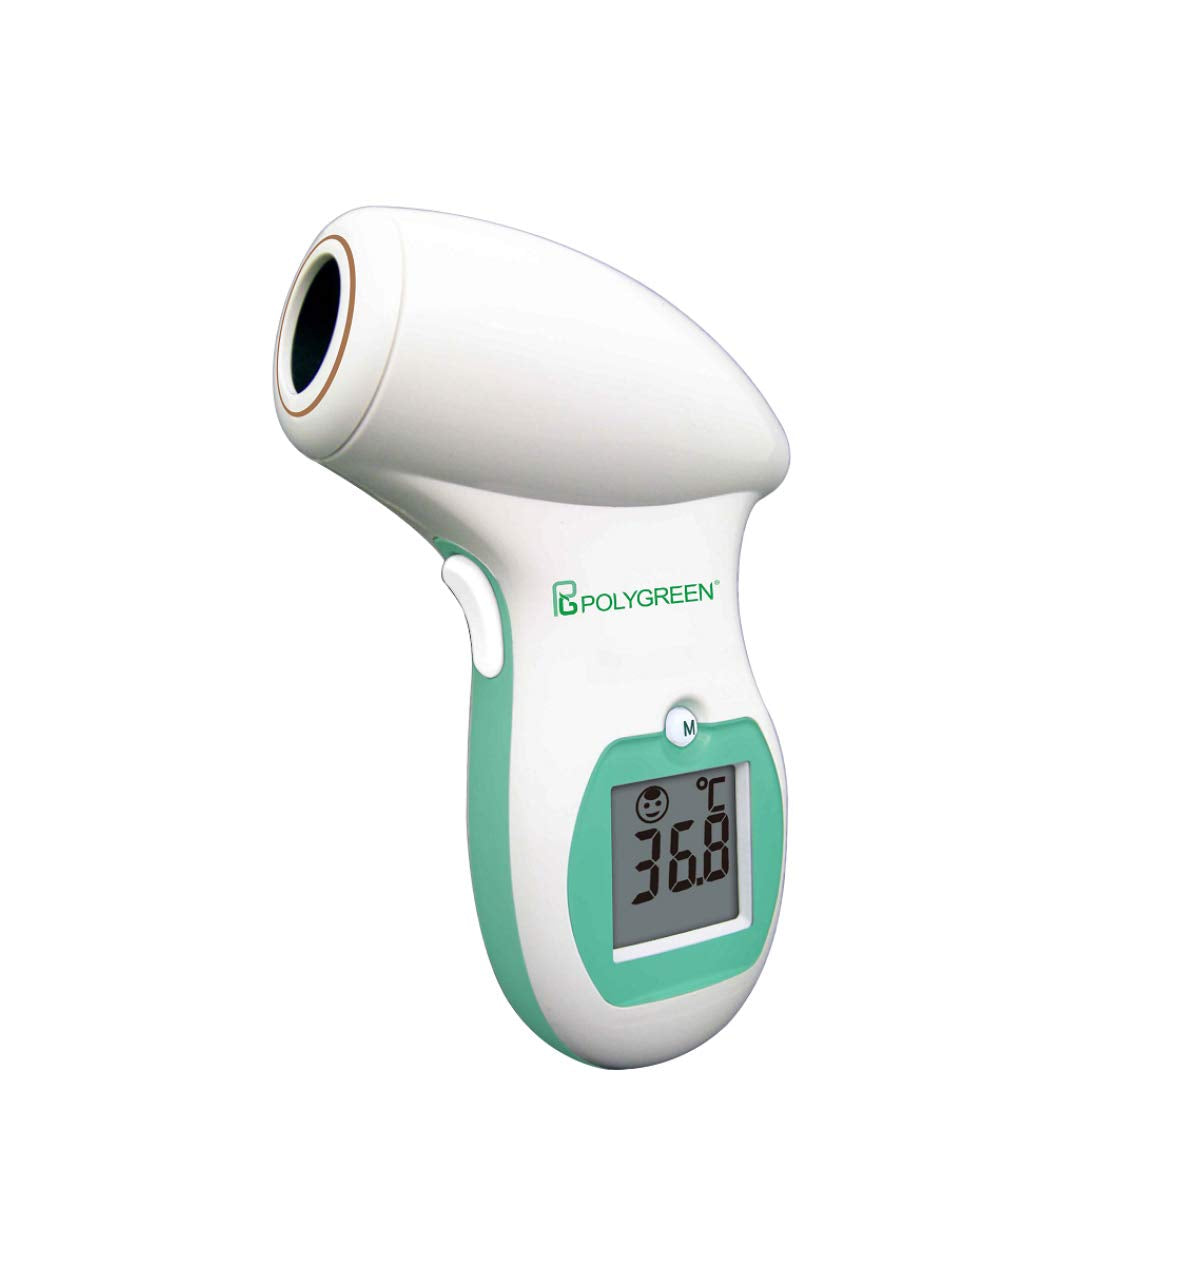 Polygreen Non-Contact Digital Thermometer for Adults and Kids, °F/°C Infrared Forehead Thermometer with Fever Alarm, Safe for Babies- KI-8280